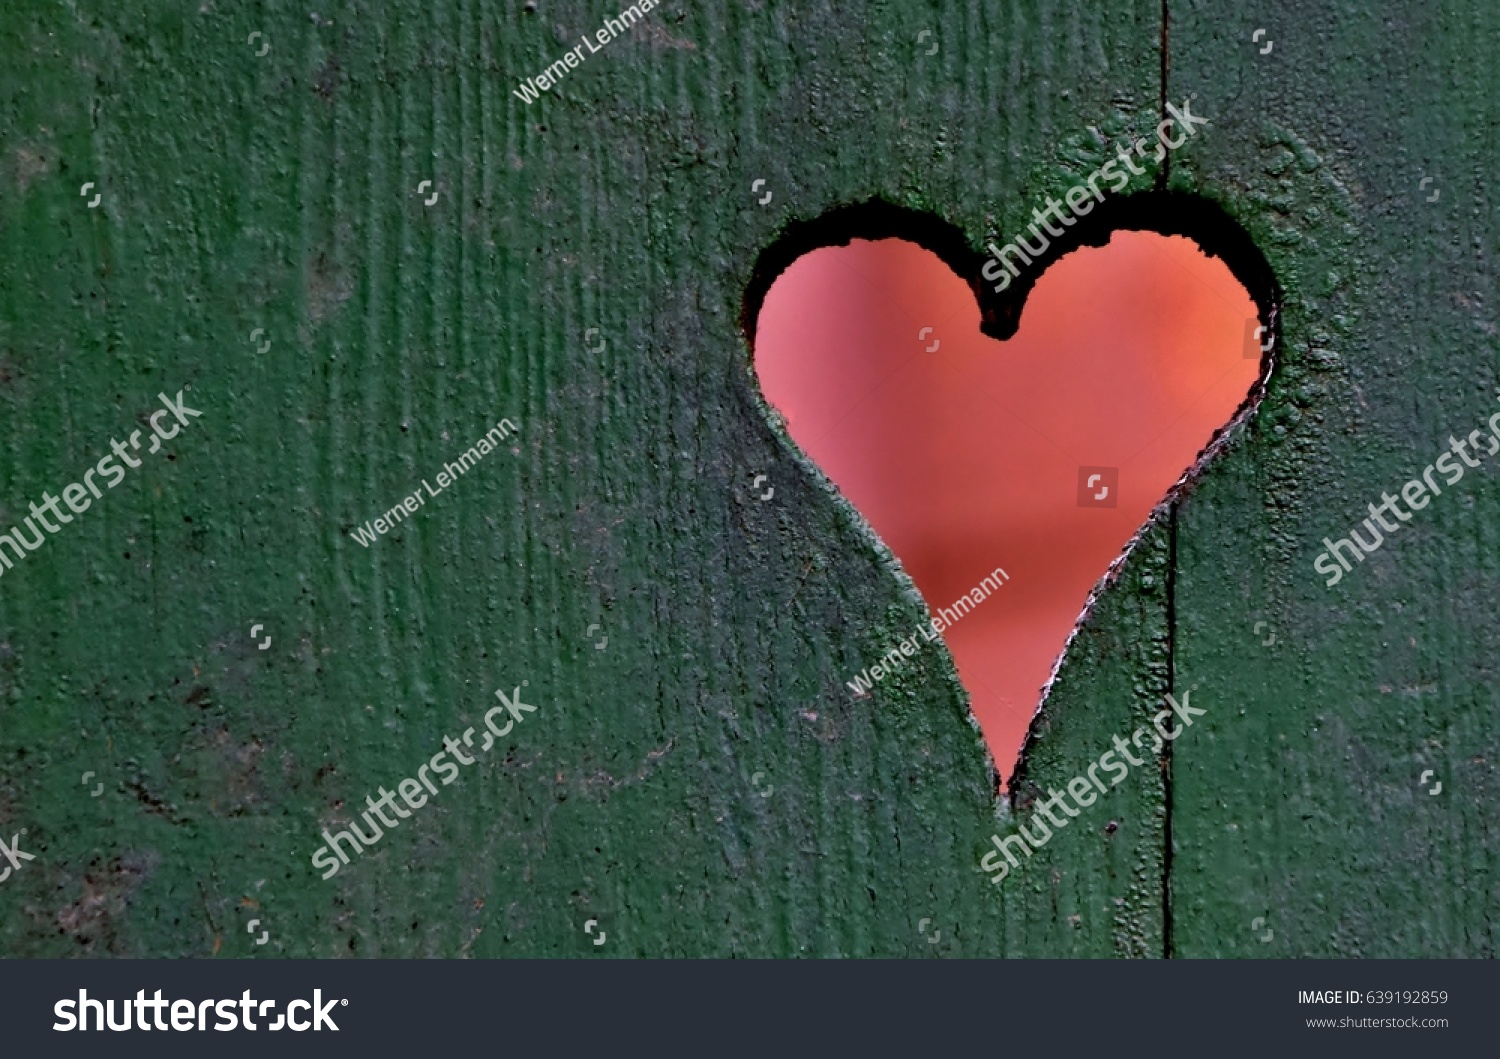 Close up of a heart in a wooden fence #639192859